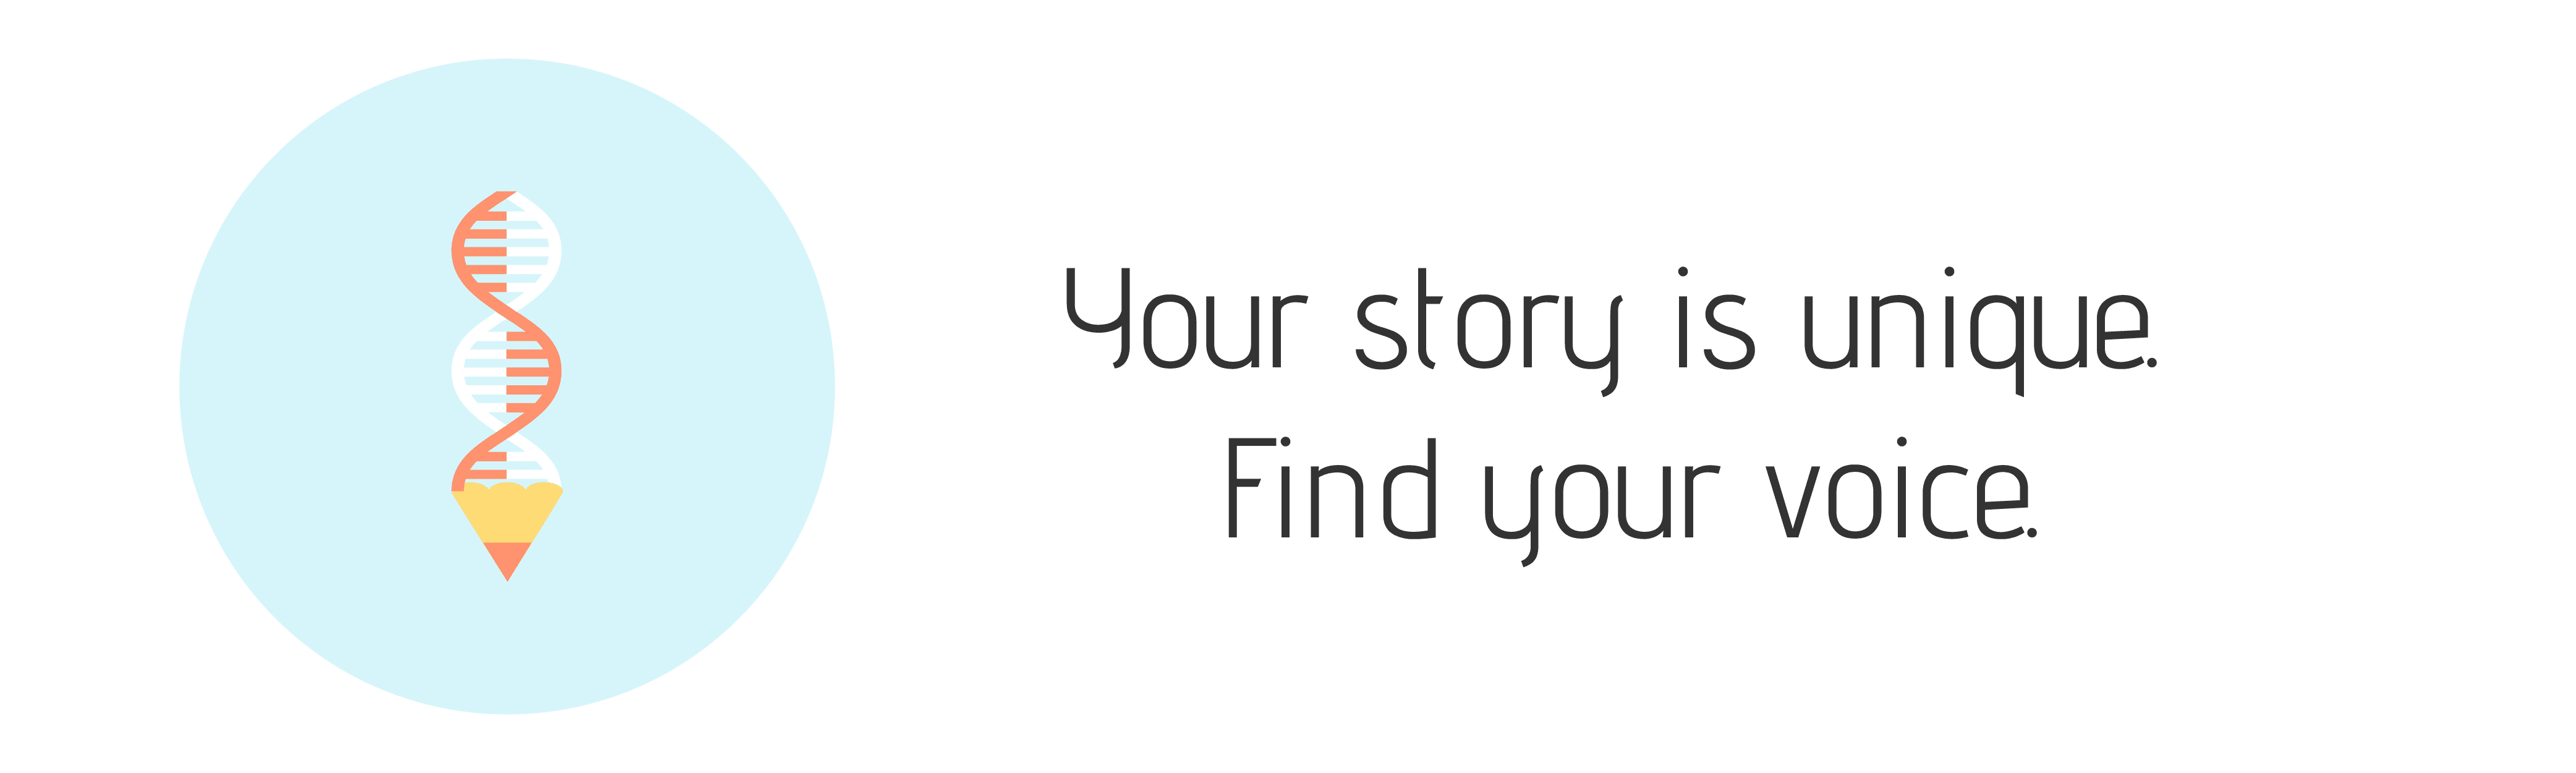 Your story is unique. Find your brand voice.